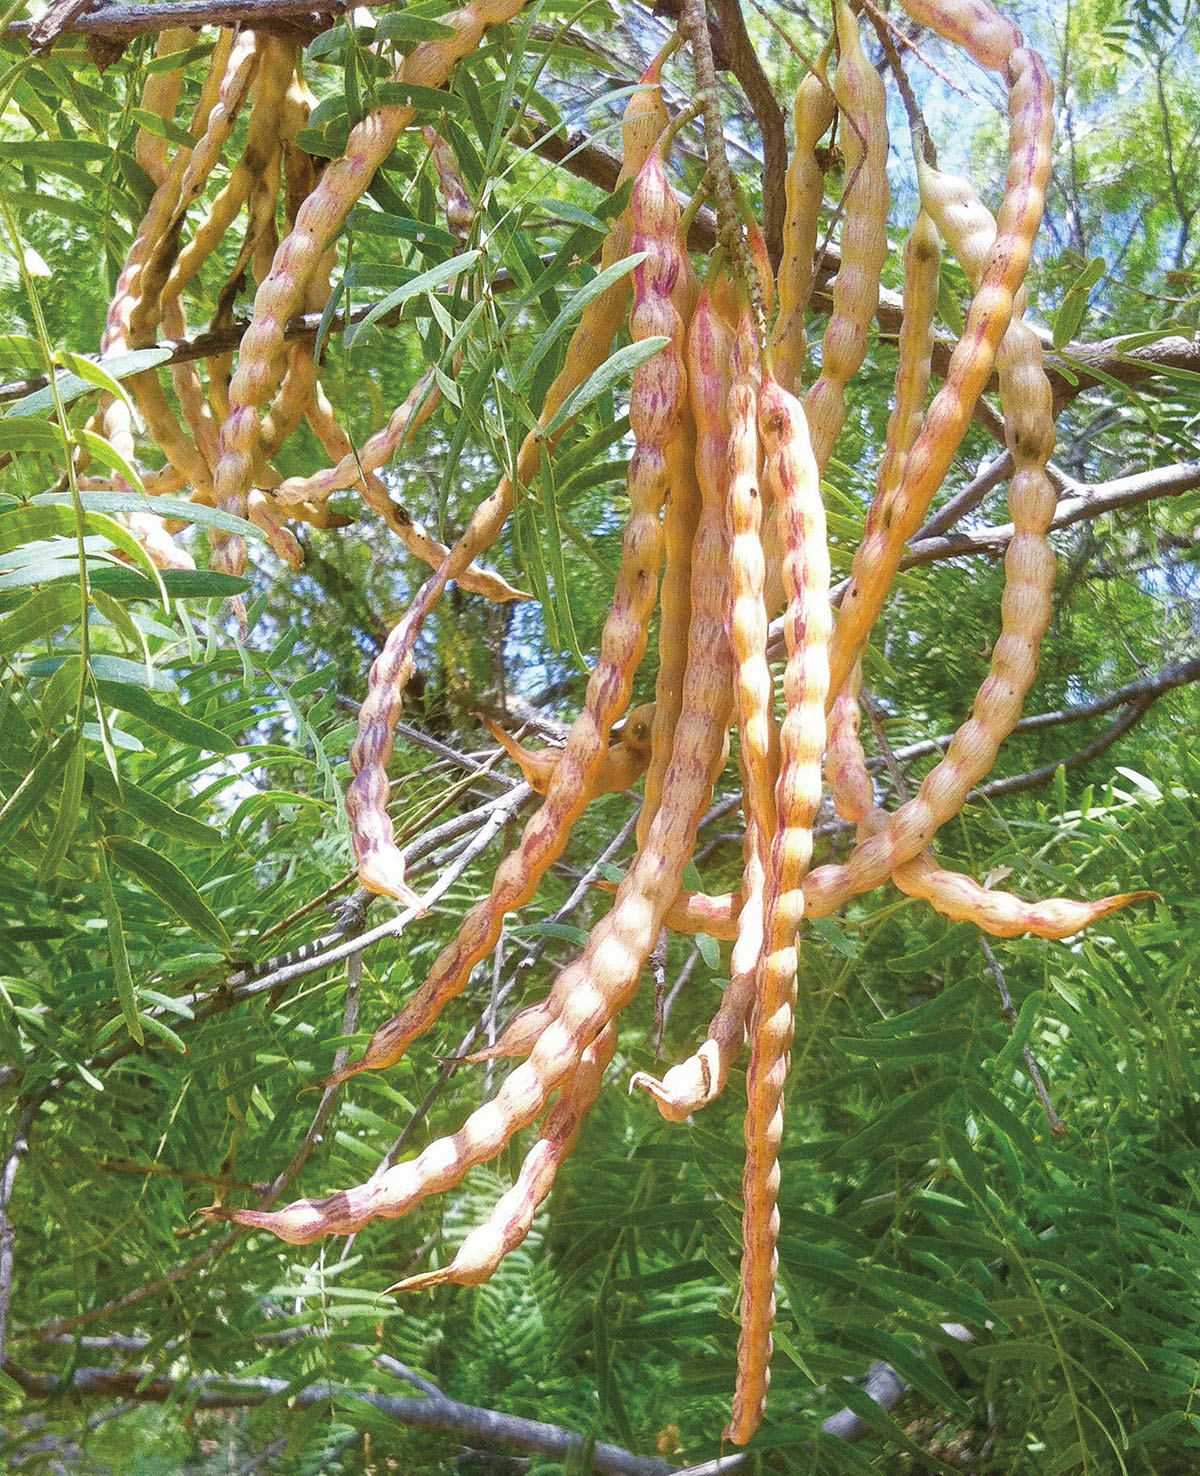 Long, string-like mesquite pods hang from a green tree